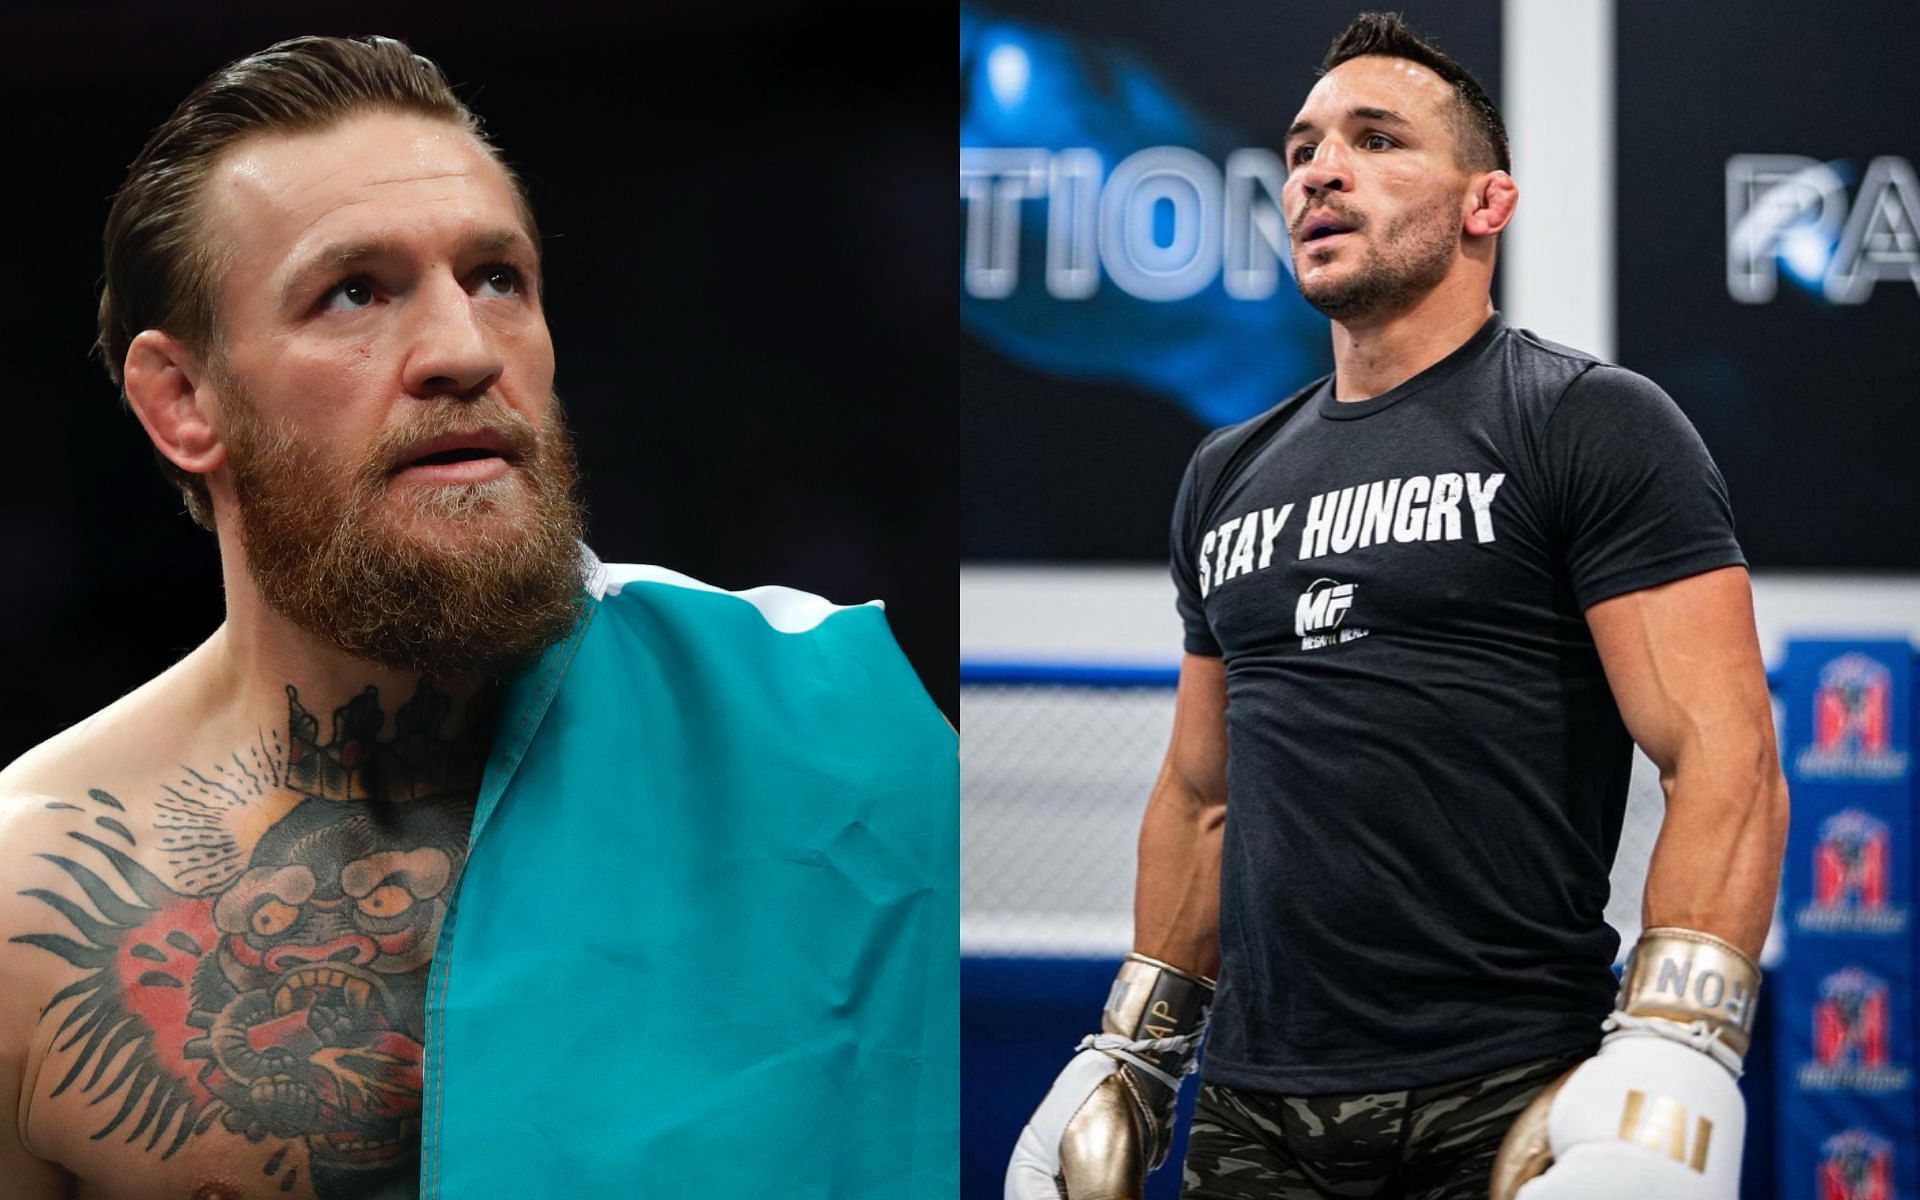 Conor Mcgregor (left) and Michael Chandler (right) [Image credits: Getty Images and @mikechandlermma on Instagram]